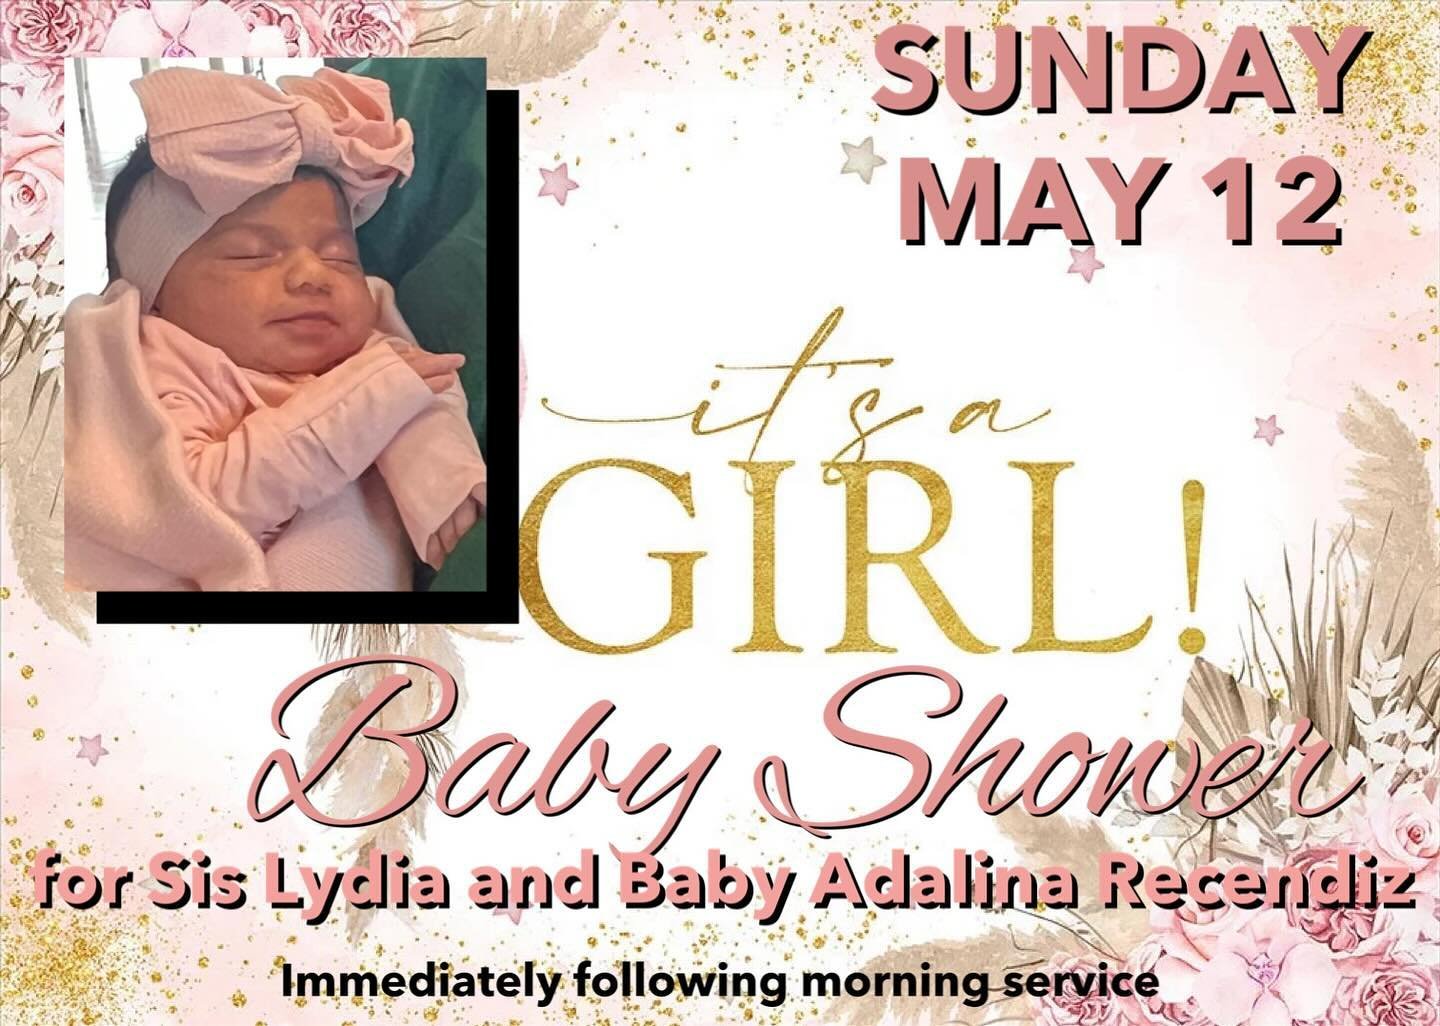 🌸💗BABY SHOWER for Sis Lydia Recendiz and her sweet baby girl, Adalina Ava. Sunday, May 12, in the foyer, immediately following morning service. 🌸💗